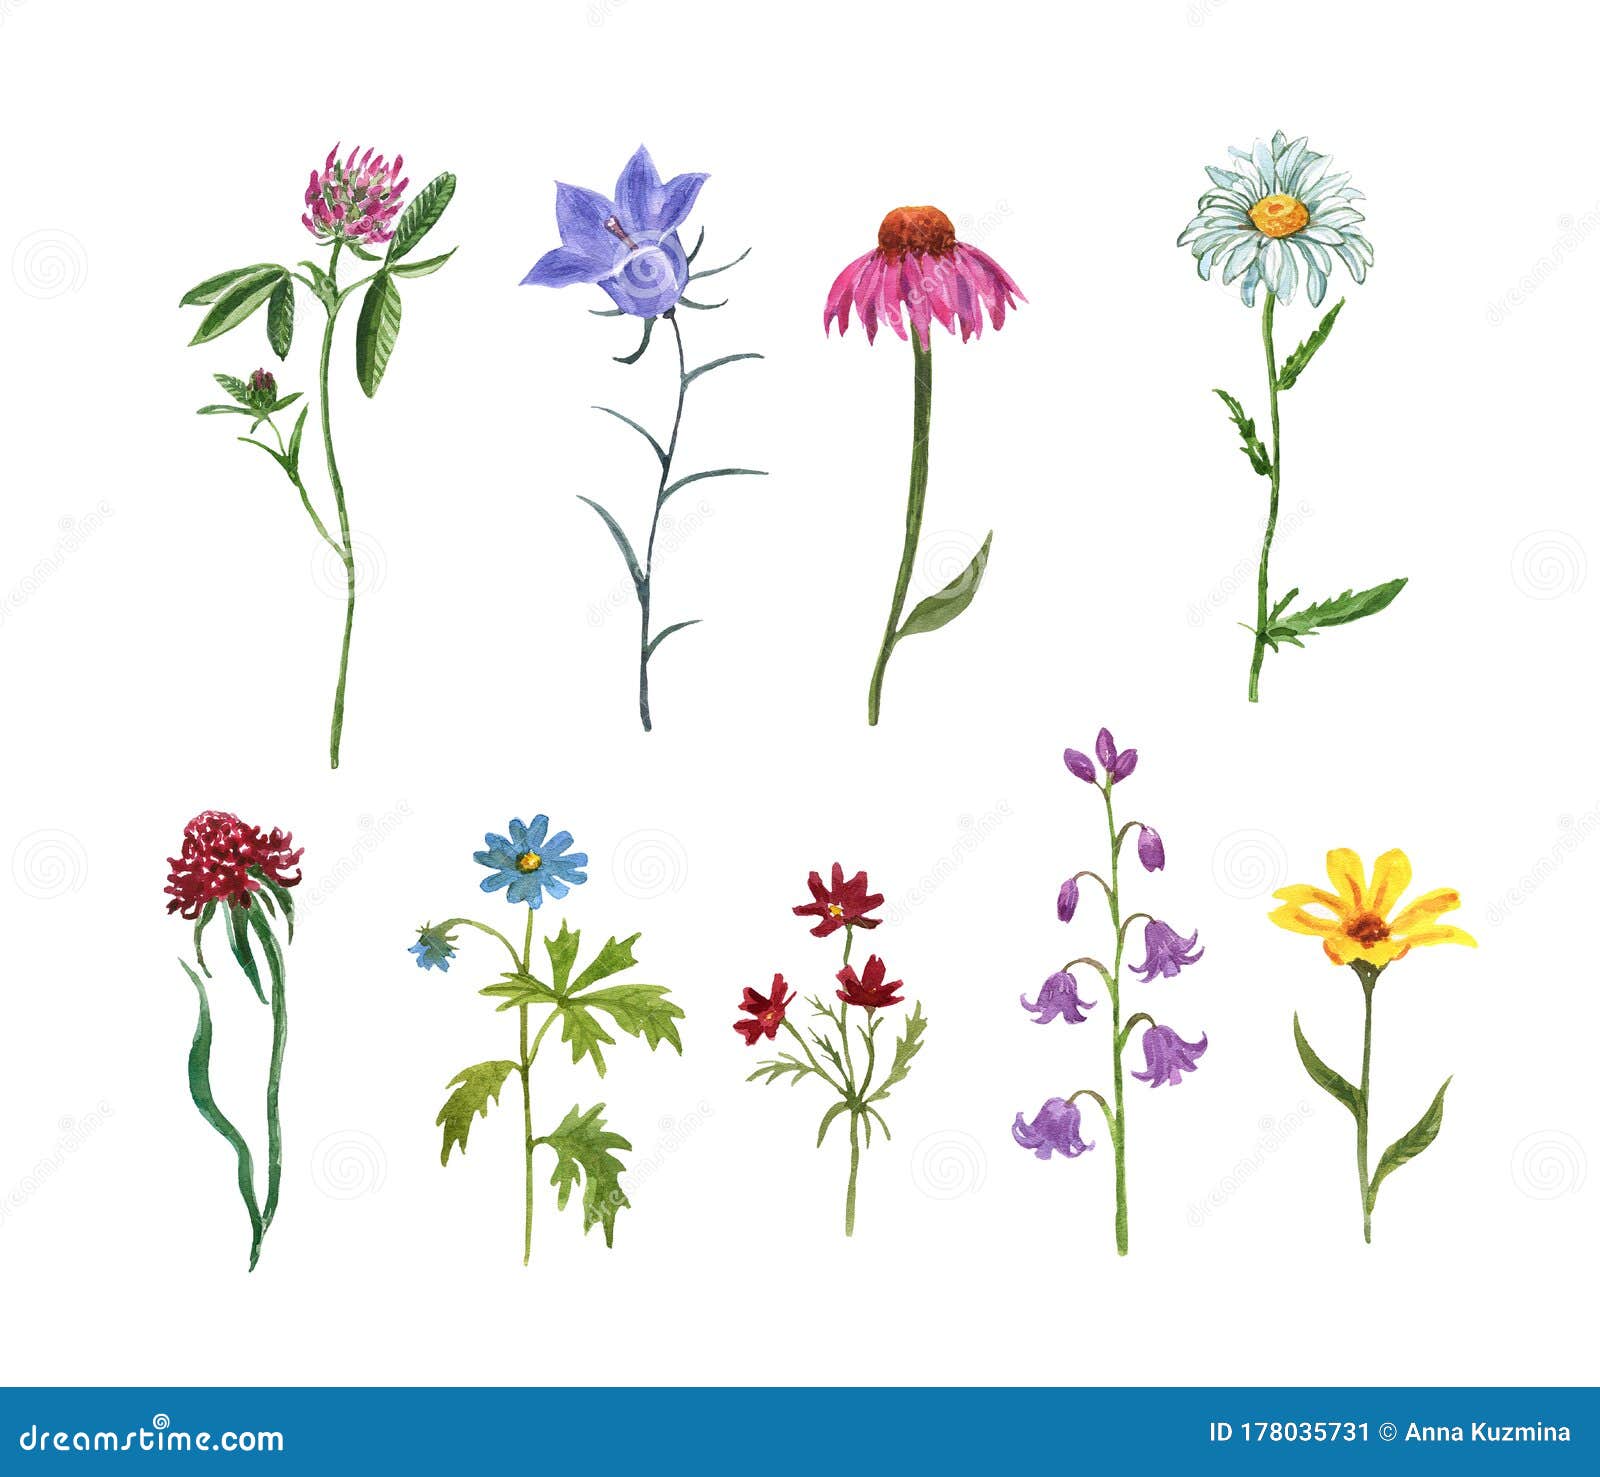 watercolor set of assorted wildflowers,  on white background. meadow plants and herbs. hand painted coneflower, bluebell